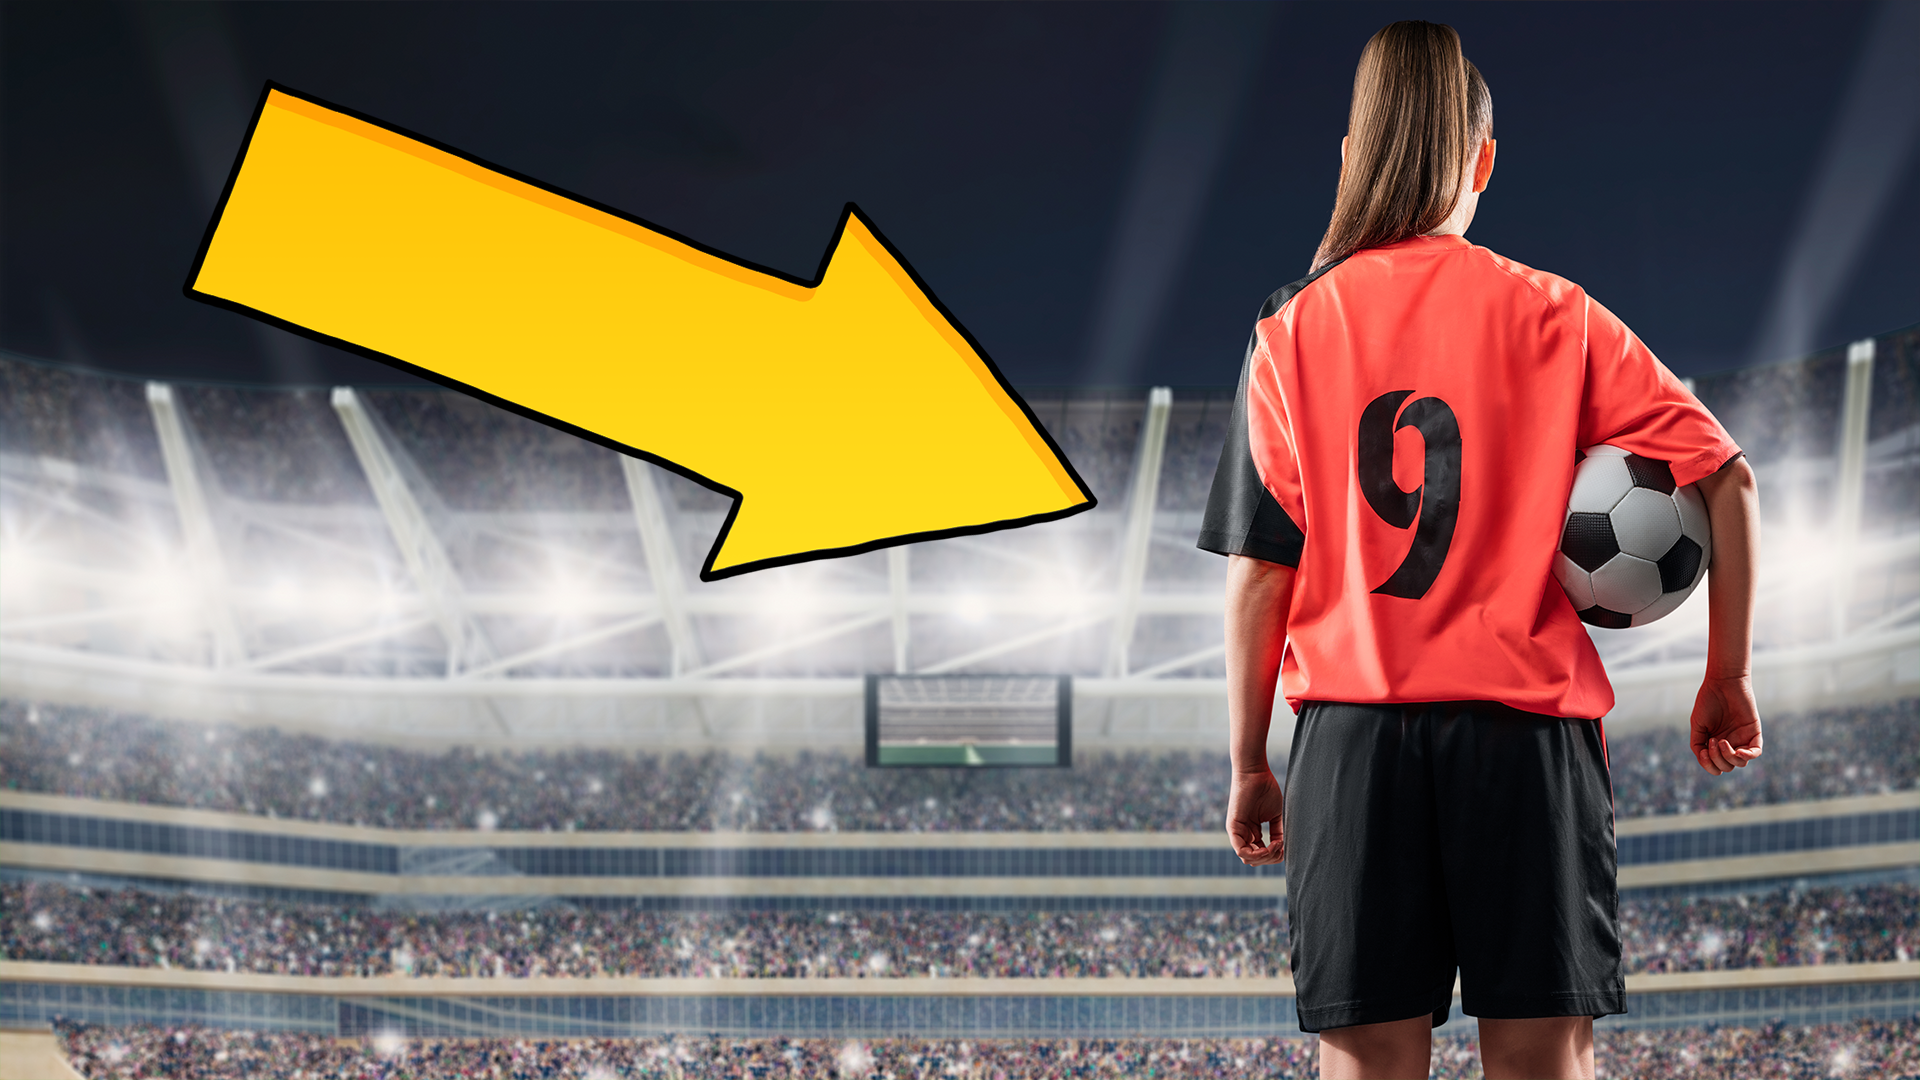 Arrow pointing to female football player in stadium